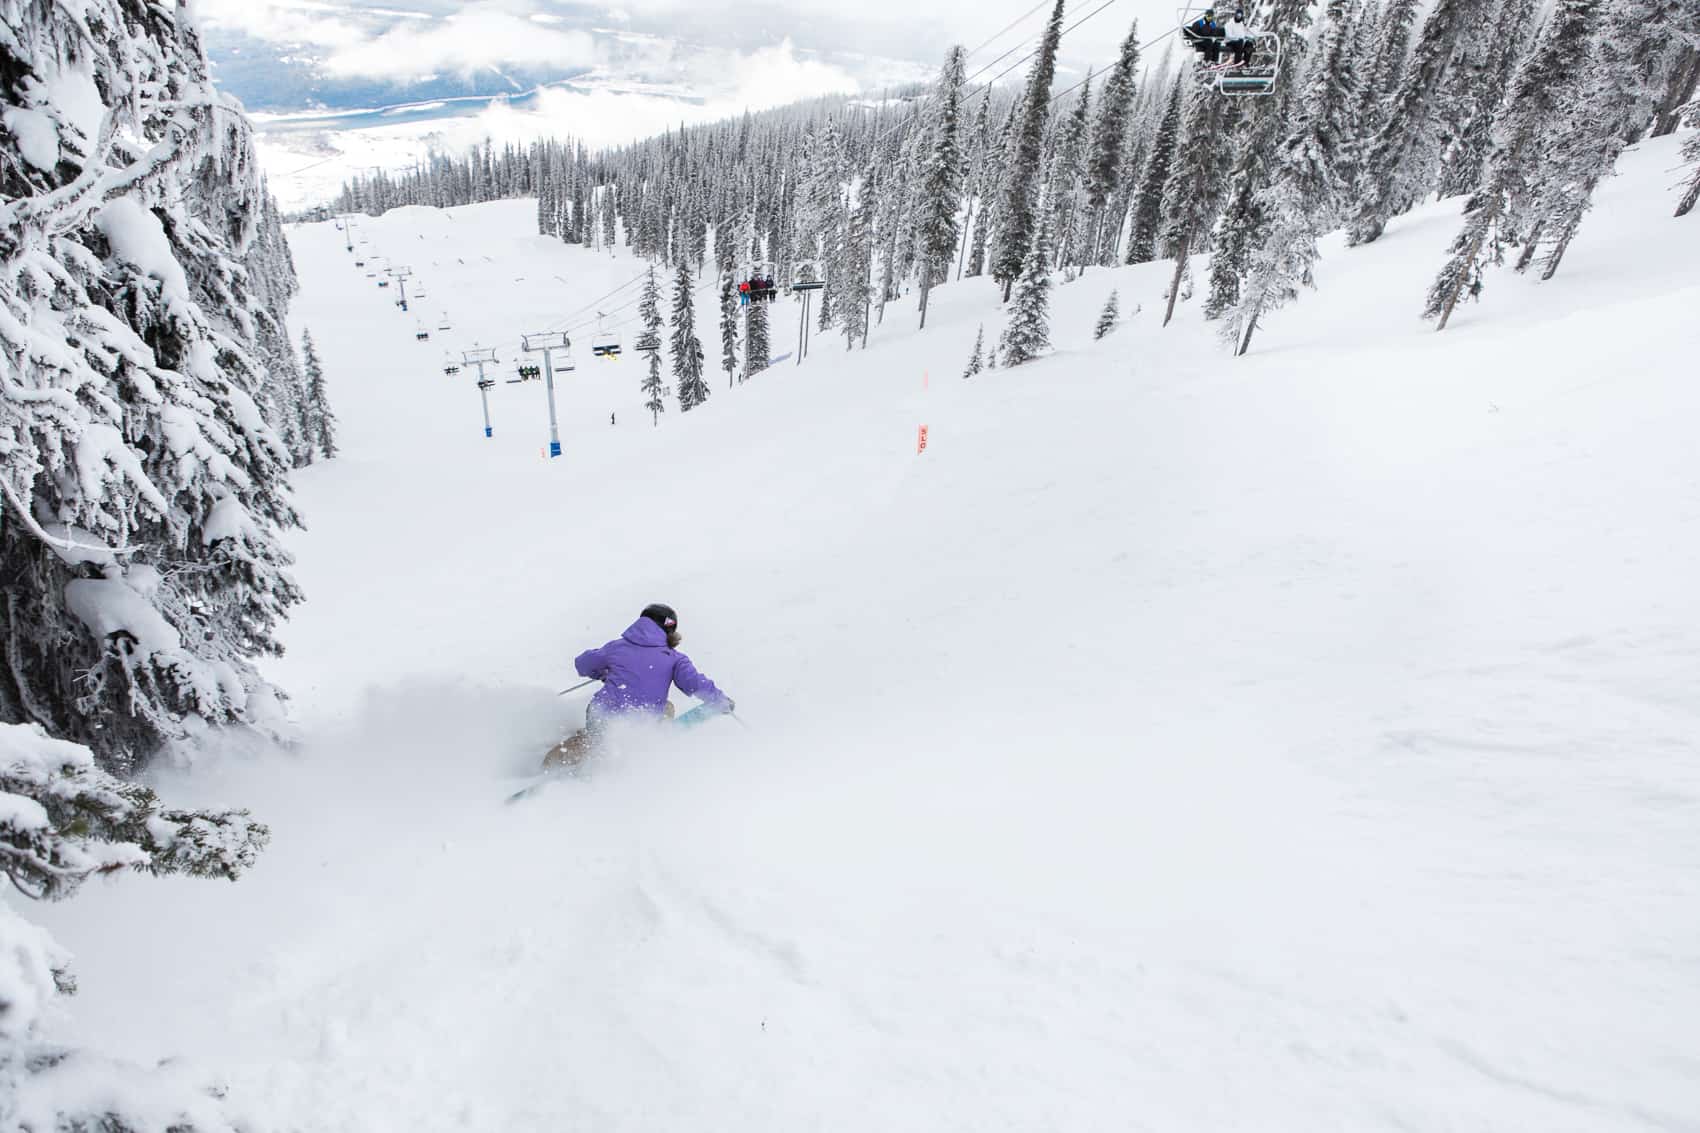 Skiing & Snowboarding - Feature Category Revelstoke Mountain Resort - Skiing POwder Revelstoke Mountain Resort